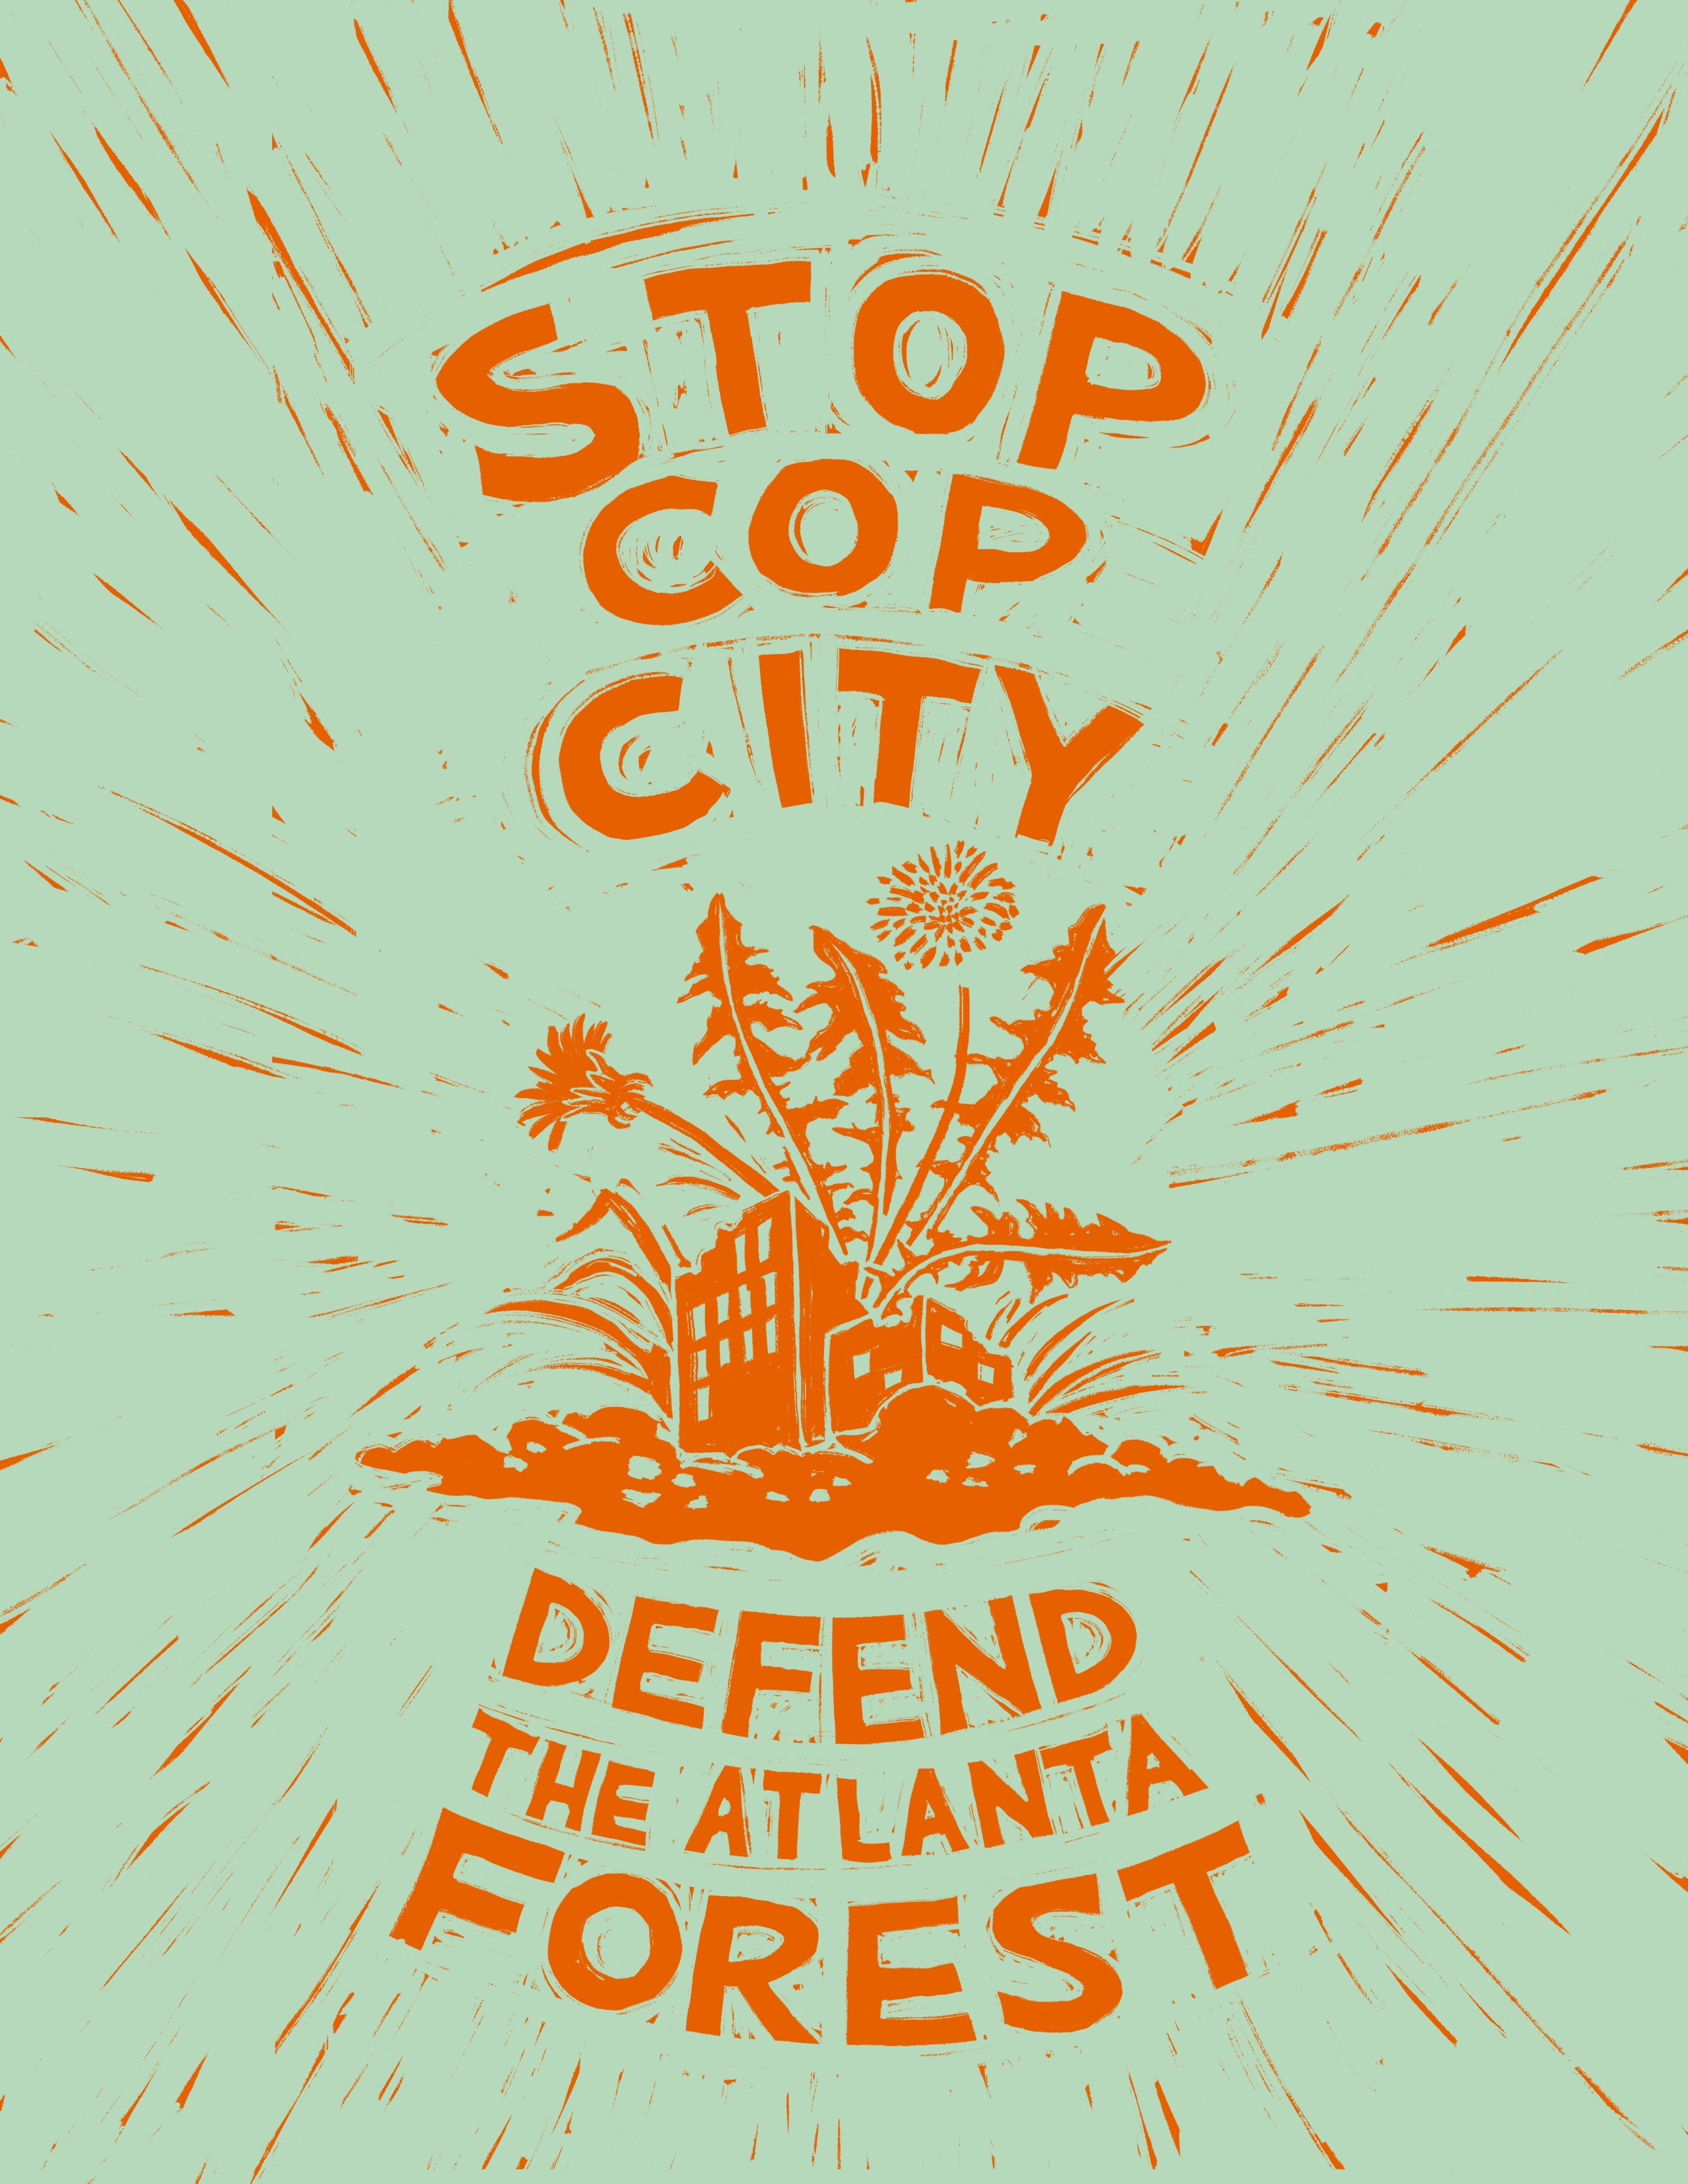 Green graphic with orange text that says Stop Cop City and Defend the Atlanta Forest. Centered in the graphic are orange flowers growing from the ground.